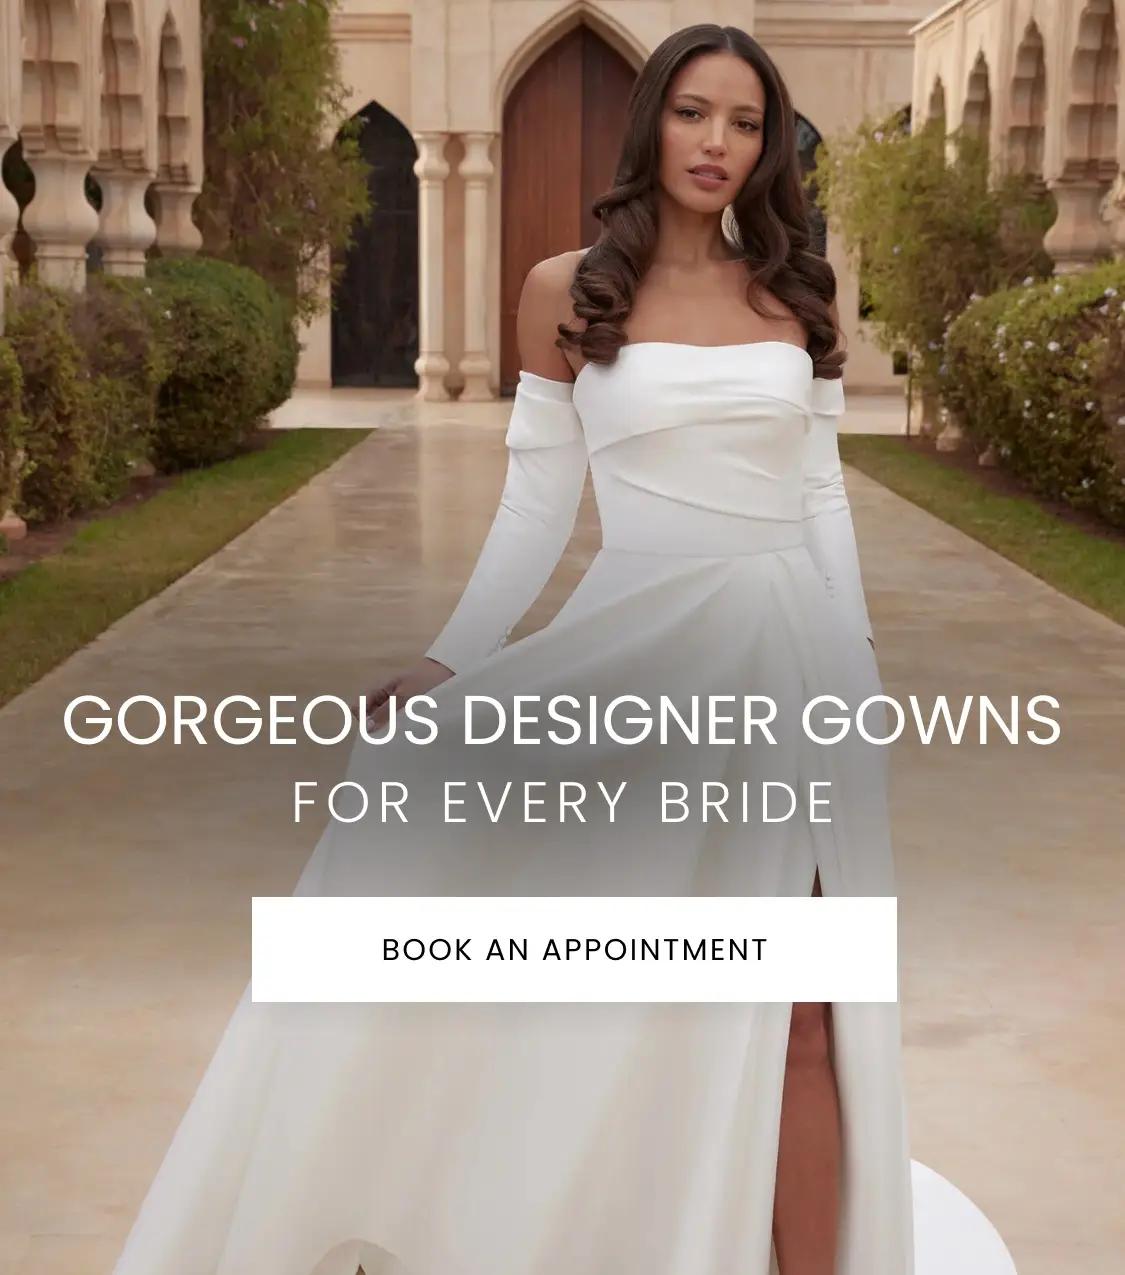 Mobile Gorgeous Designer Gowns For Every Bride Banner